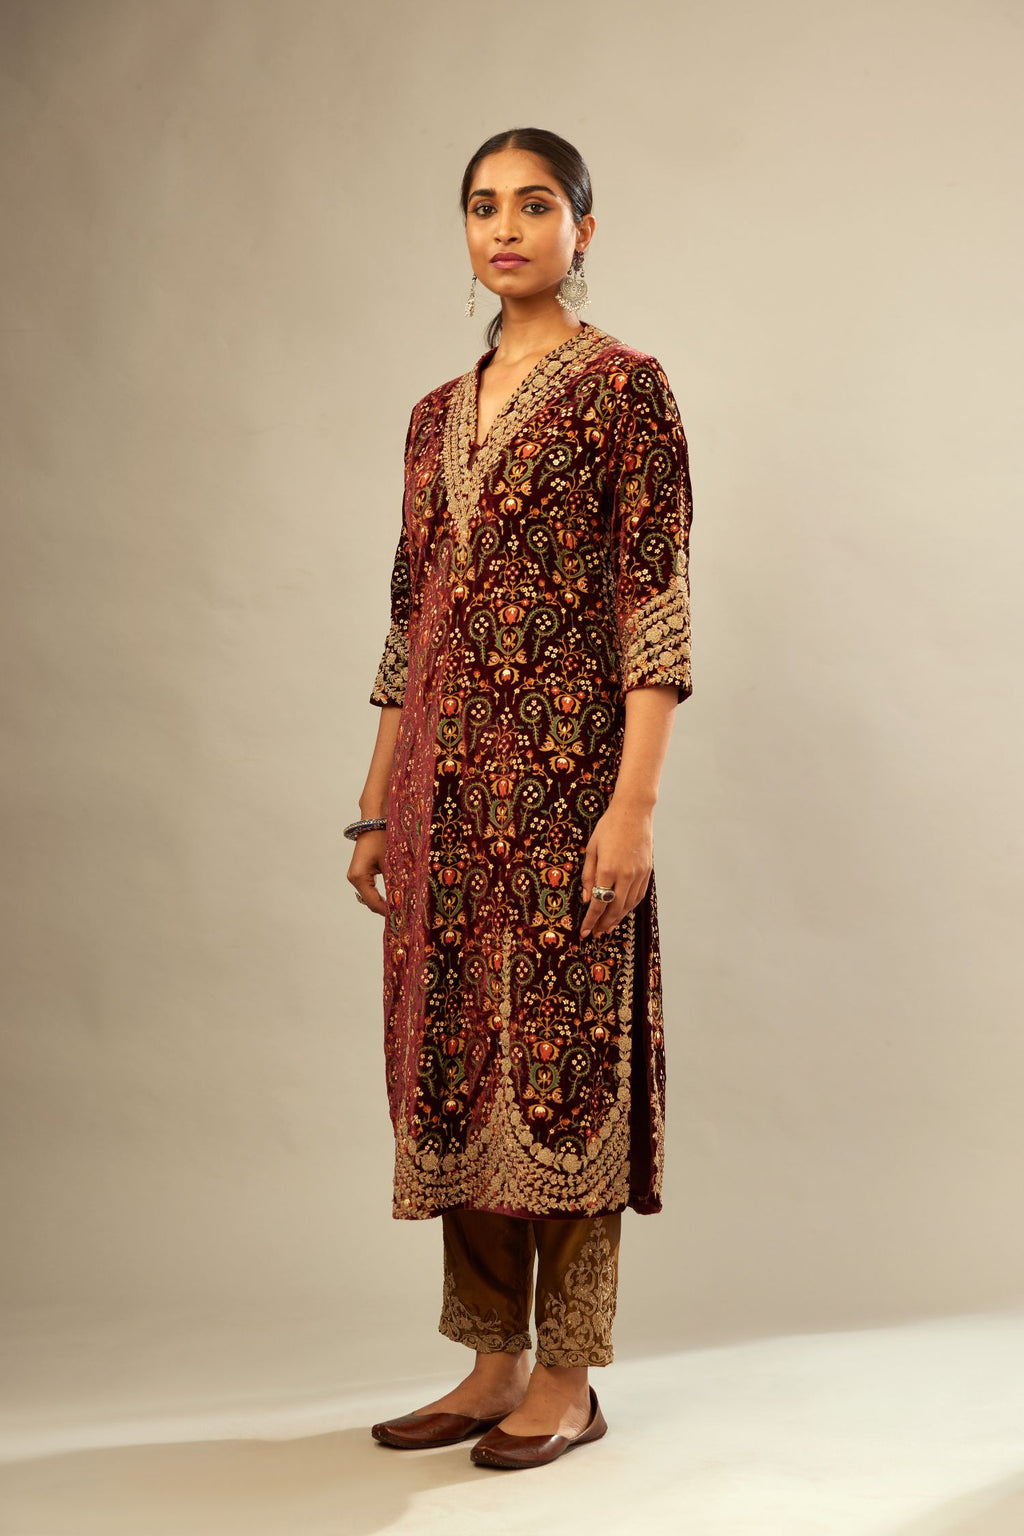 Maroon silk velvet lined kurta set with heavy jaal embroidery all over the kurta and ornamented with dori embroidery at neck, sleeves, side slits and hem.